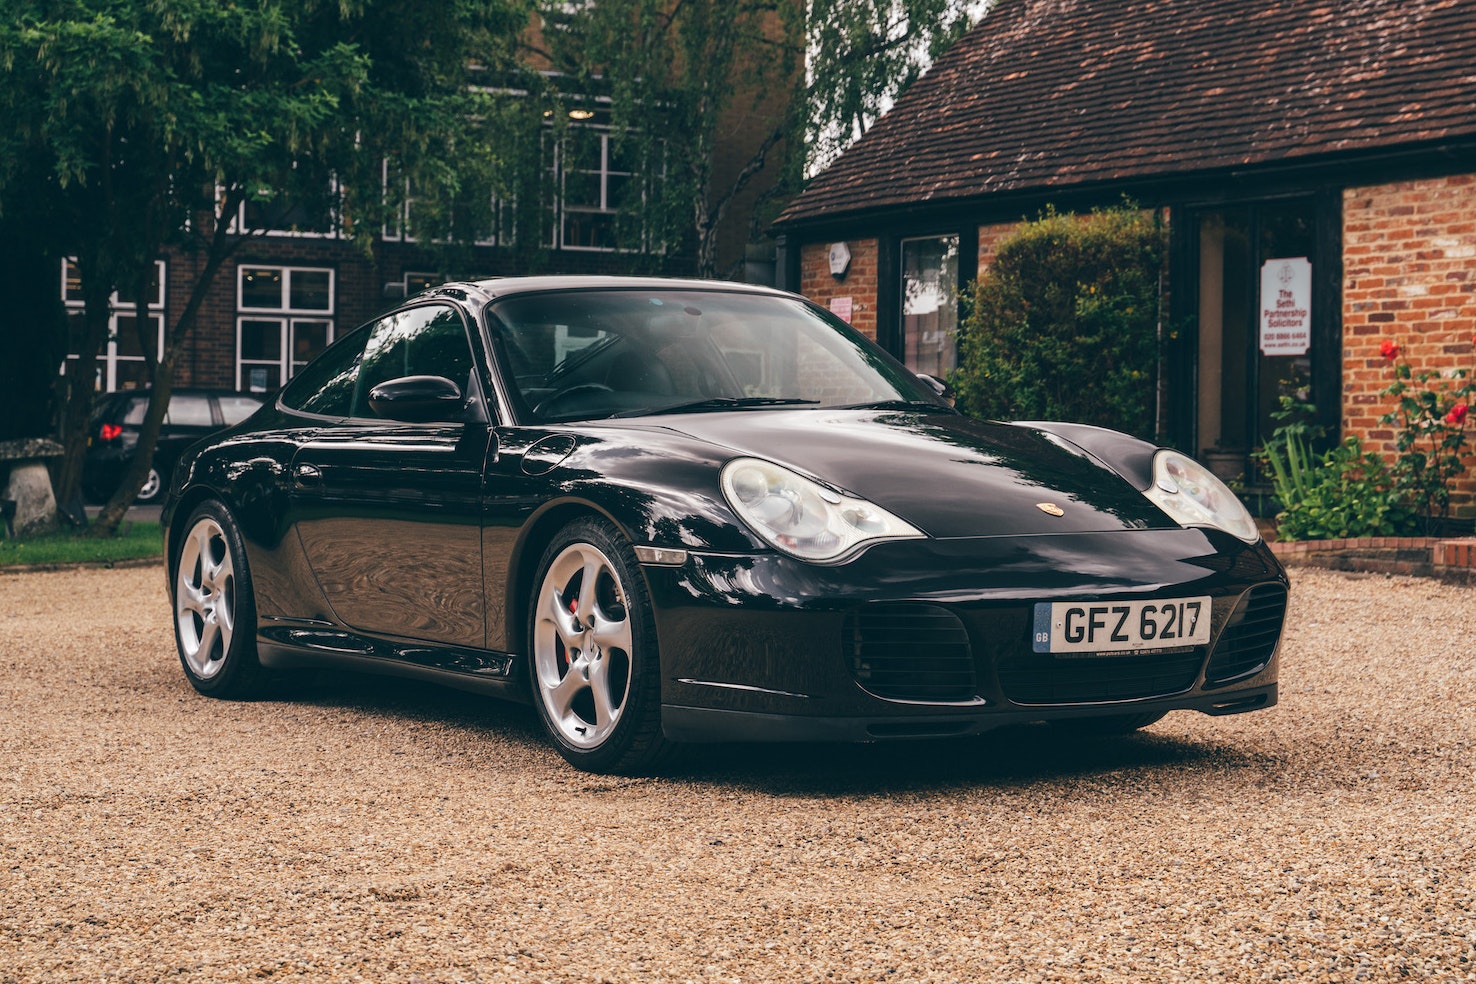 2003 PORSCHE 911 (996) CARRERA 4S for sale by auction in Harrow, Greater London, United Kingdom image